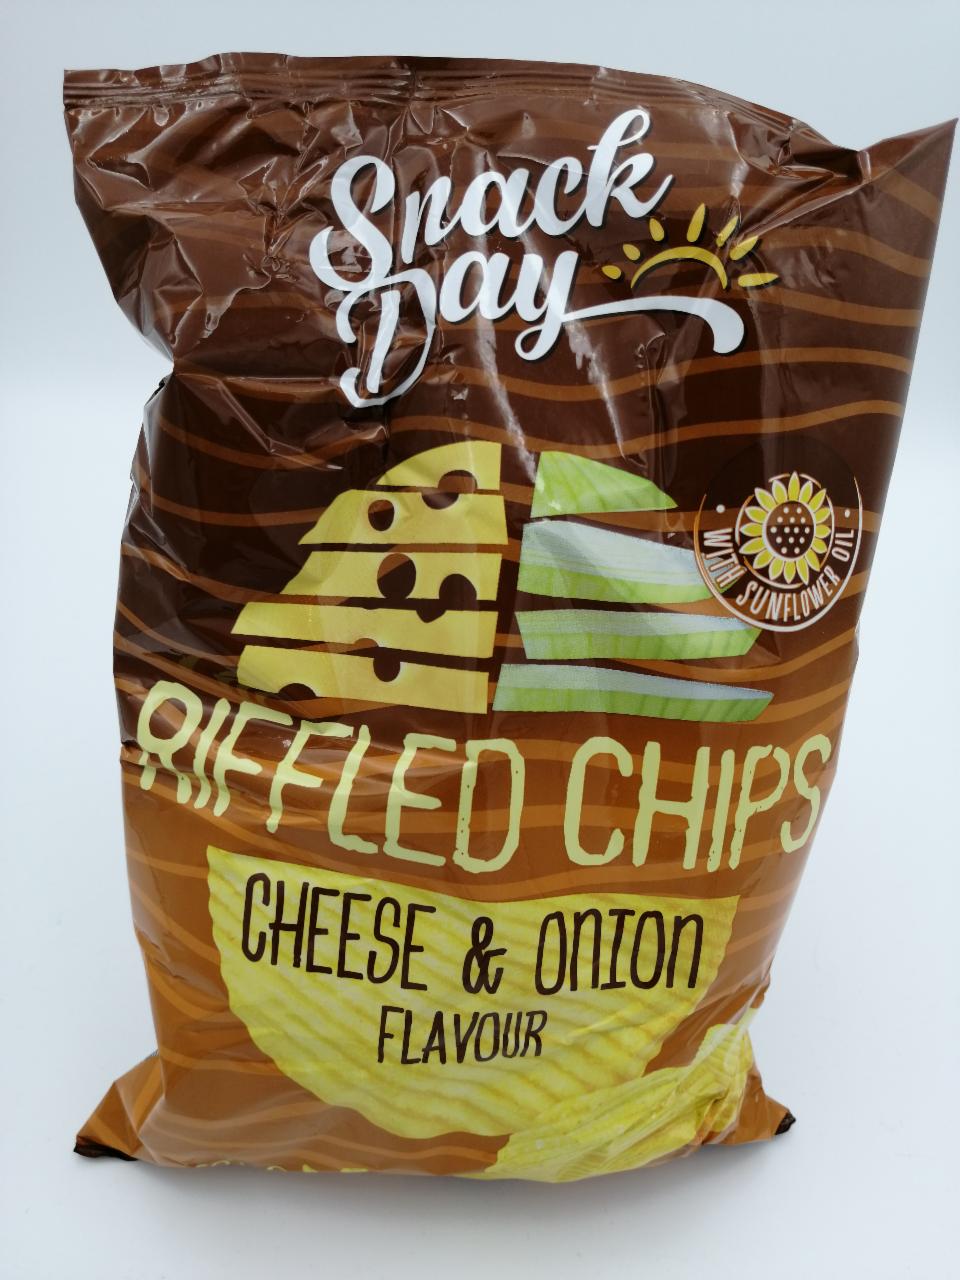 Képek - Riffled chips cheese & onion Snack day